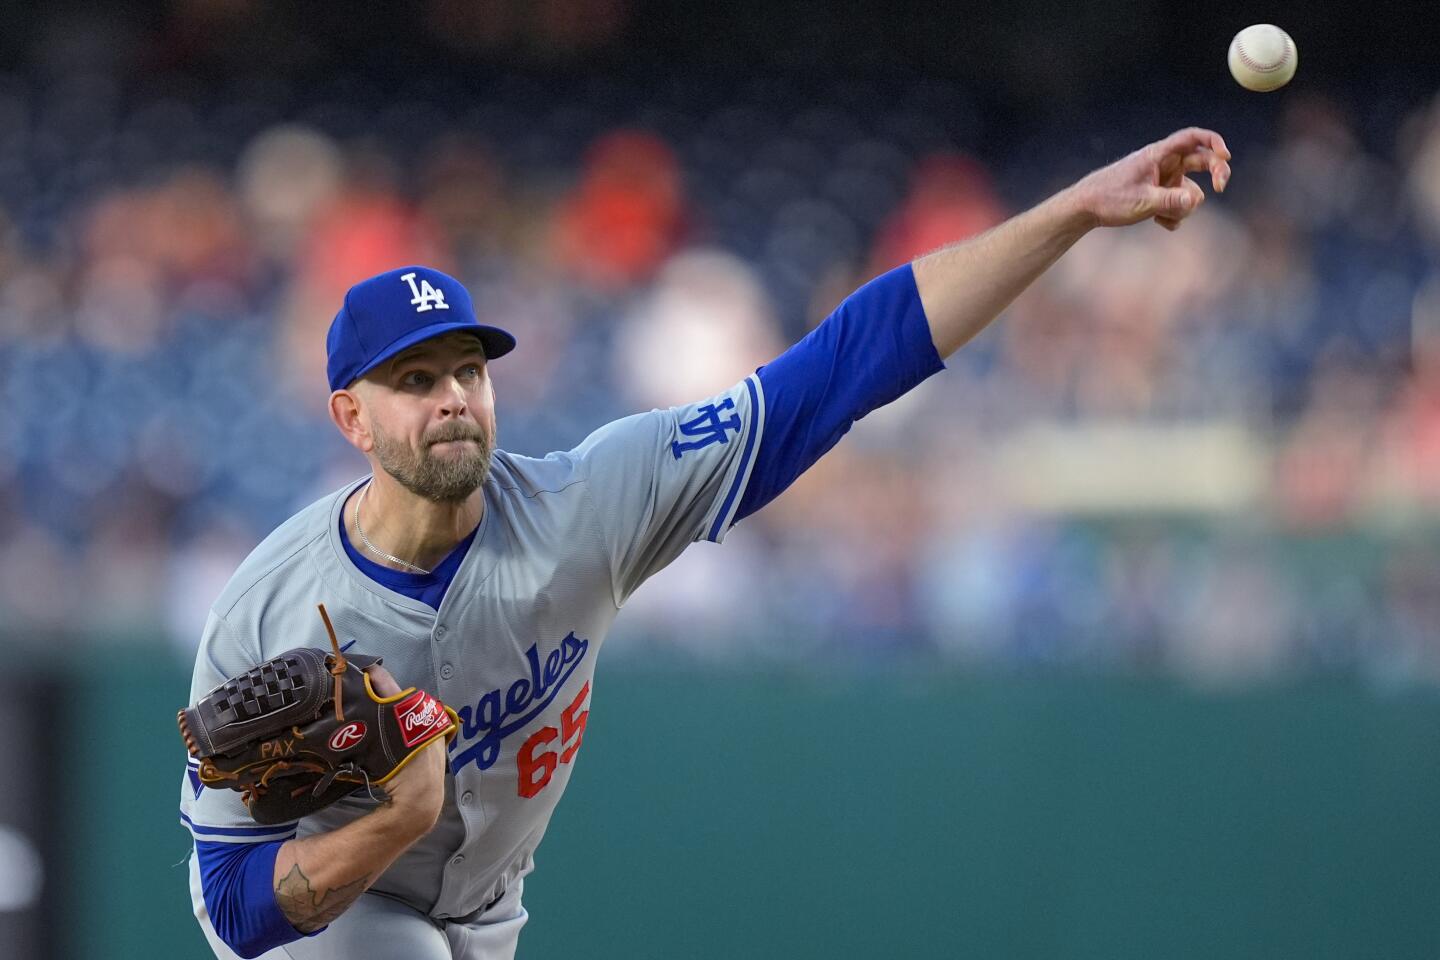 Game 2: Dodgers LHP James Paxton (4-0, 3.06 ERA)Although the Dodgers have won five of his six starts, the 35-year-old leads the majors with 24 walks in 32⅓ innings and he’s pitching to a 5.46 FIP (fielding independent pitching). The one loss was walking eight batters in five innings of three-run ball to the Padres last month.